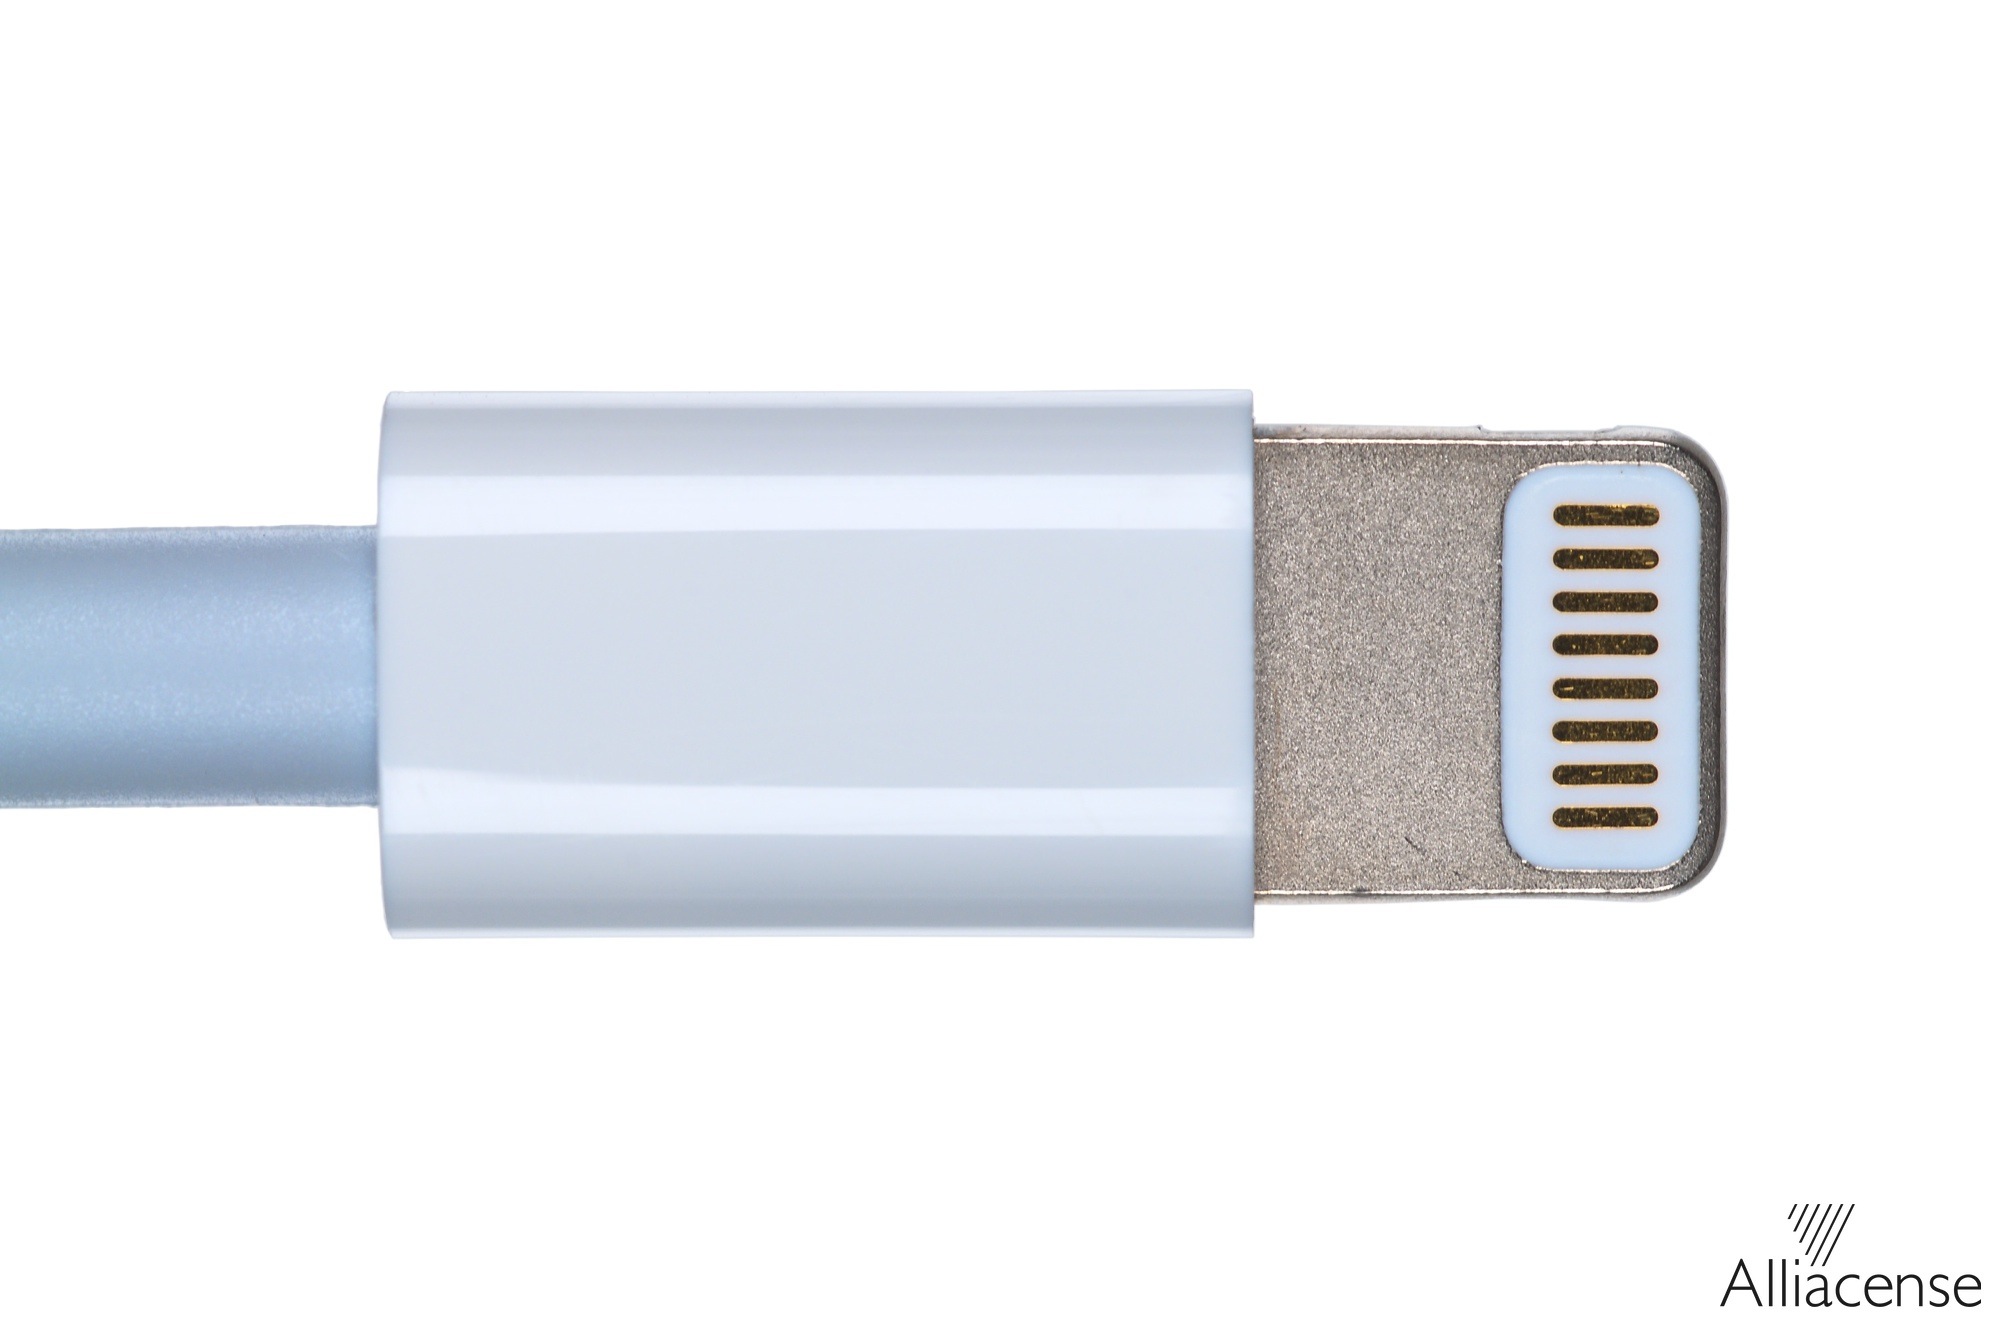 Apple's mega-complicated Lightning connector analyzed